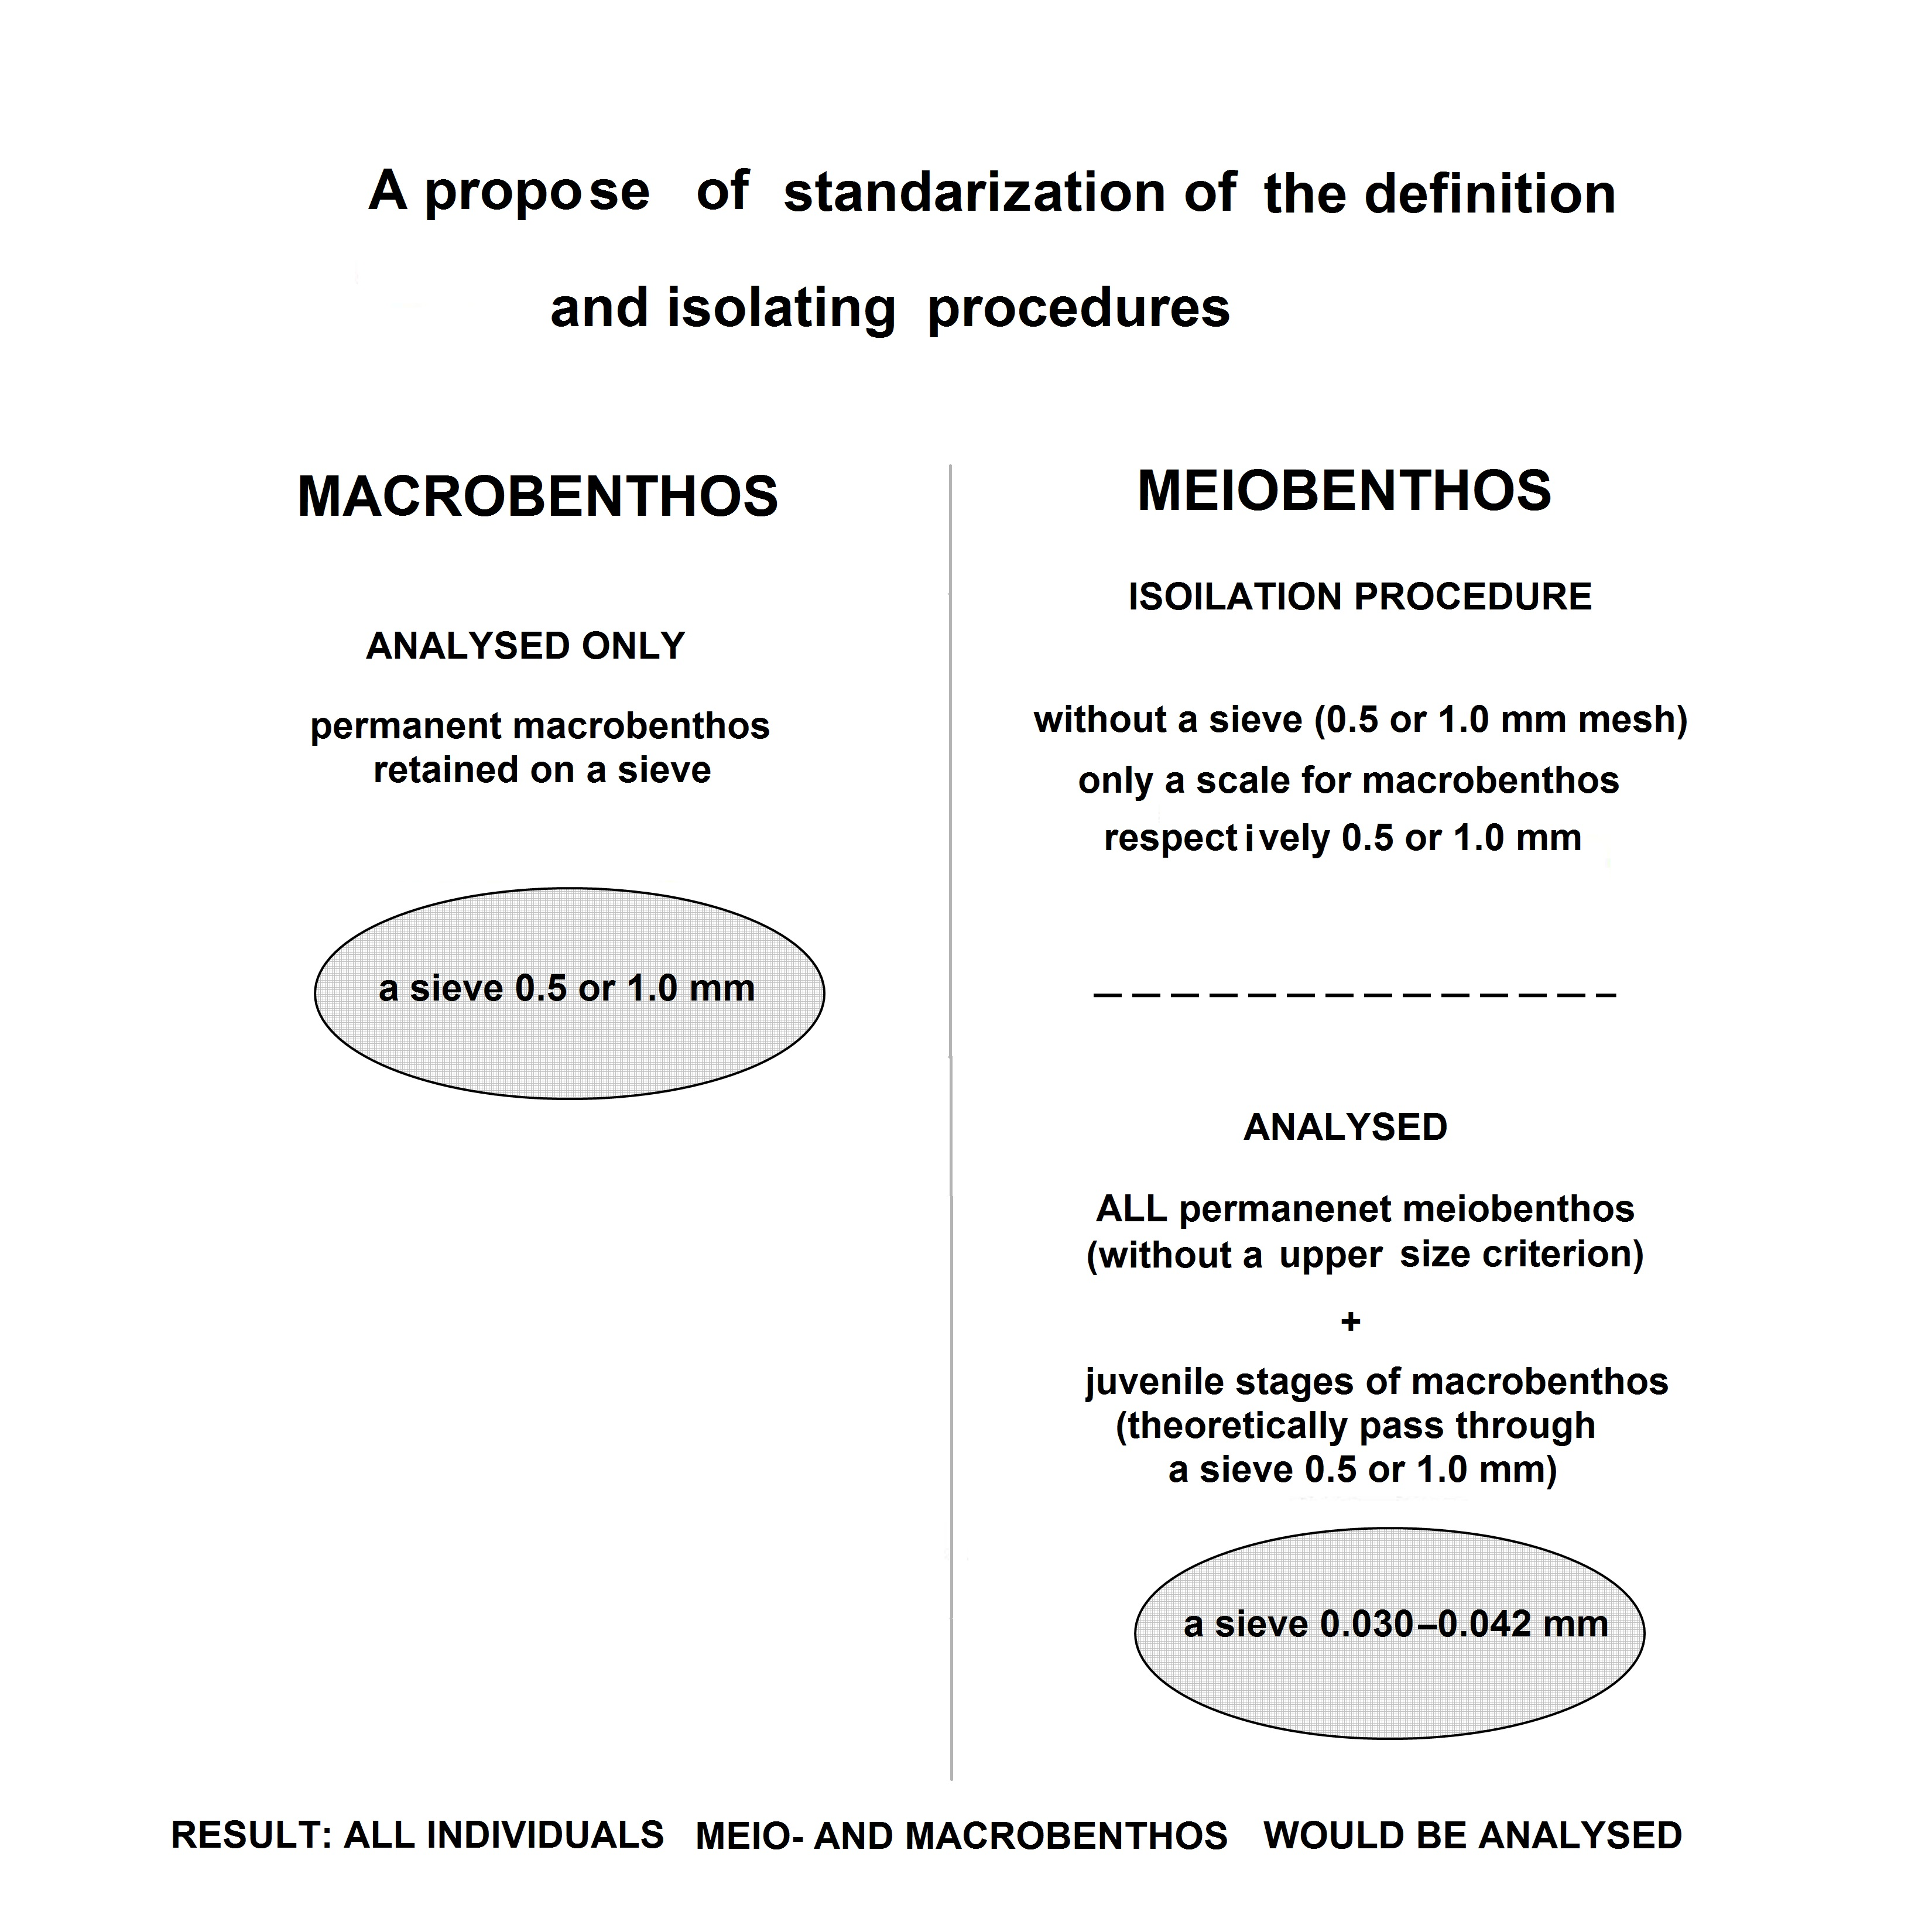 Fig.3. A propose of standardization of the definition and collected procedures for meio- and macrobenthos